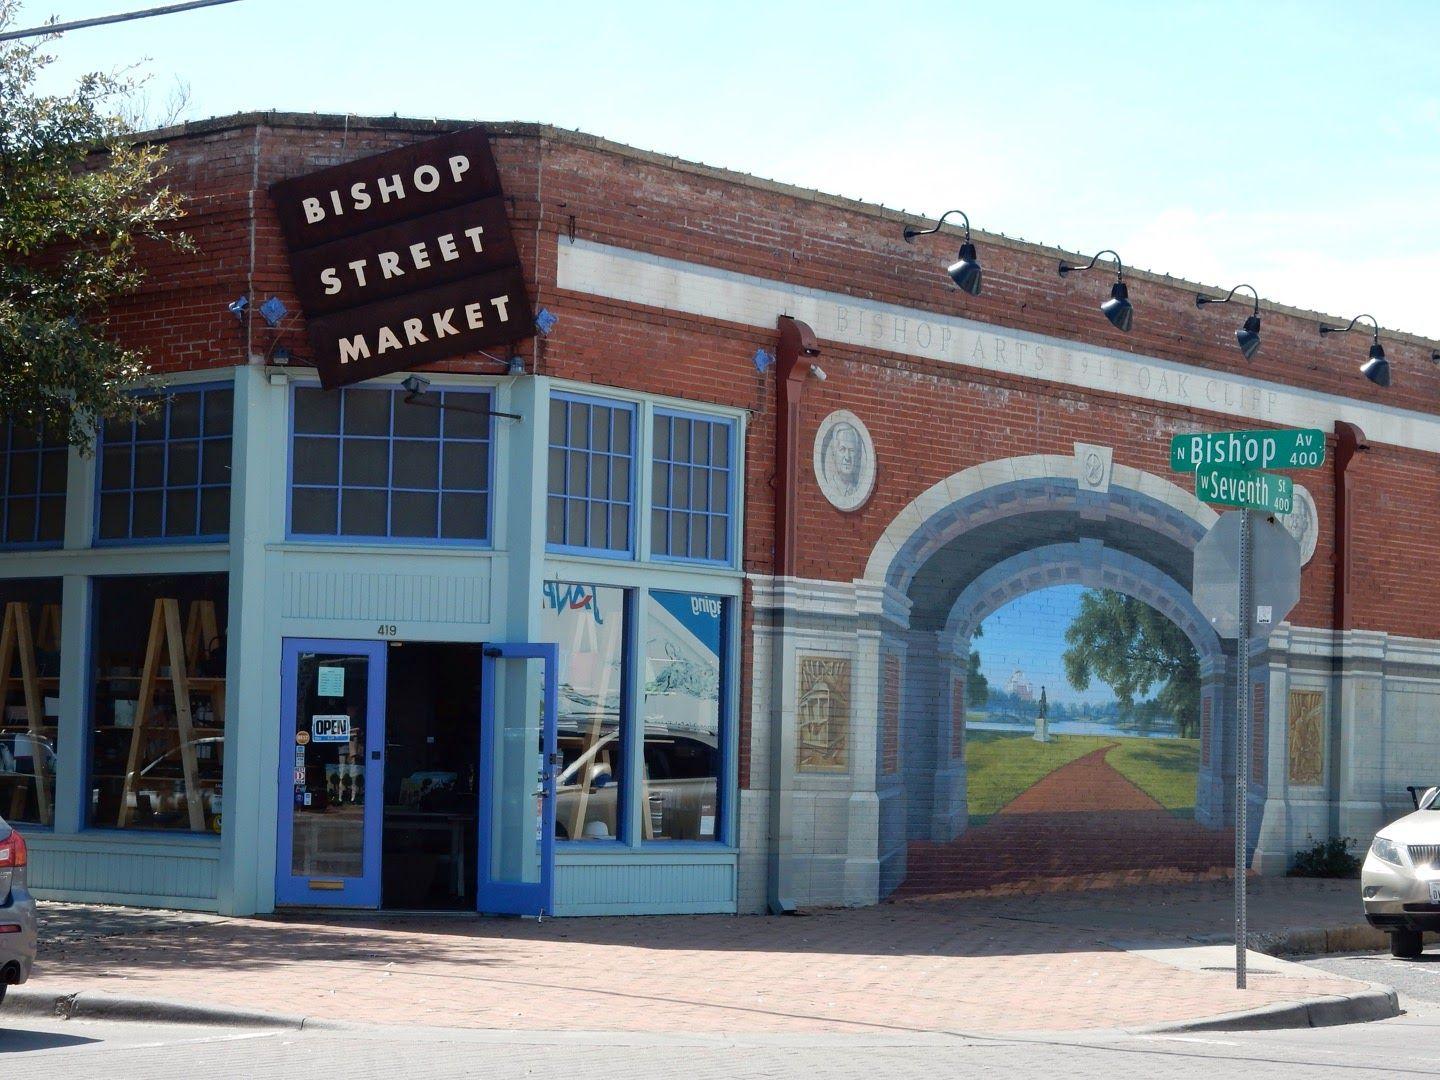 The exterior of the Bishop Street Market. The shop is on a corner and there is a mural on the side.